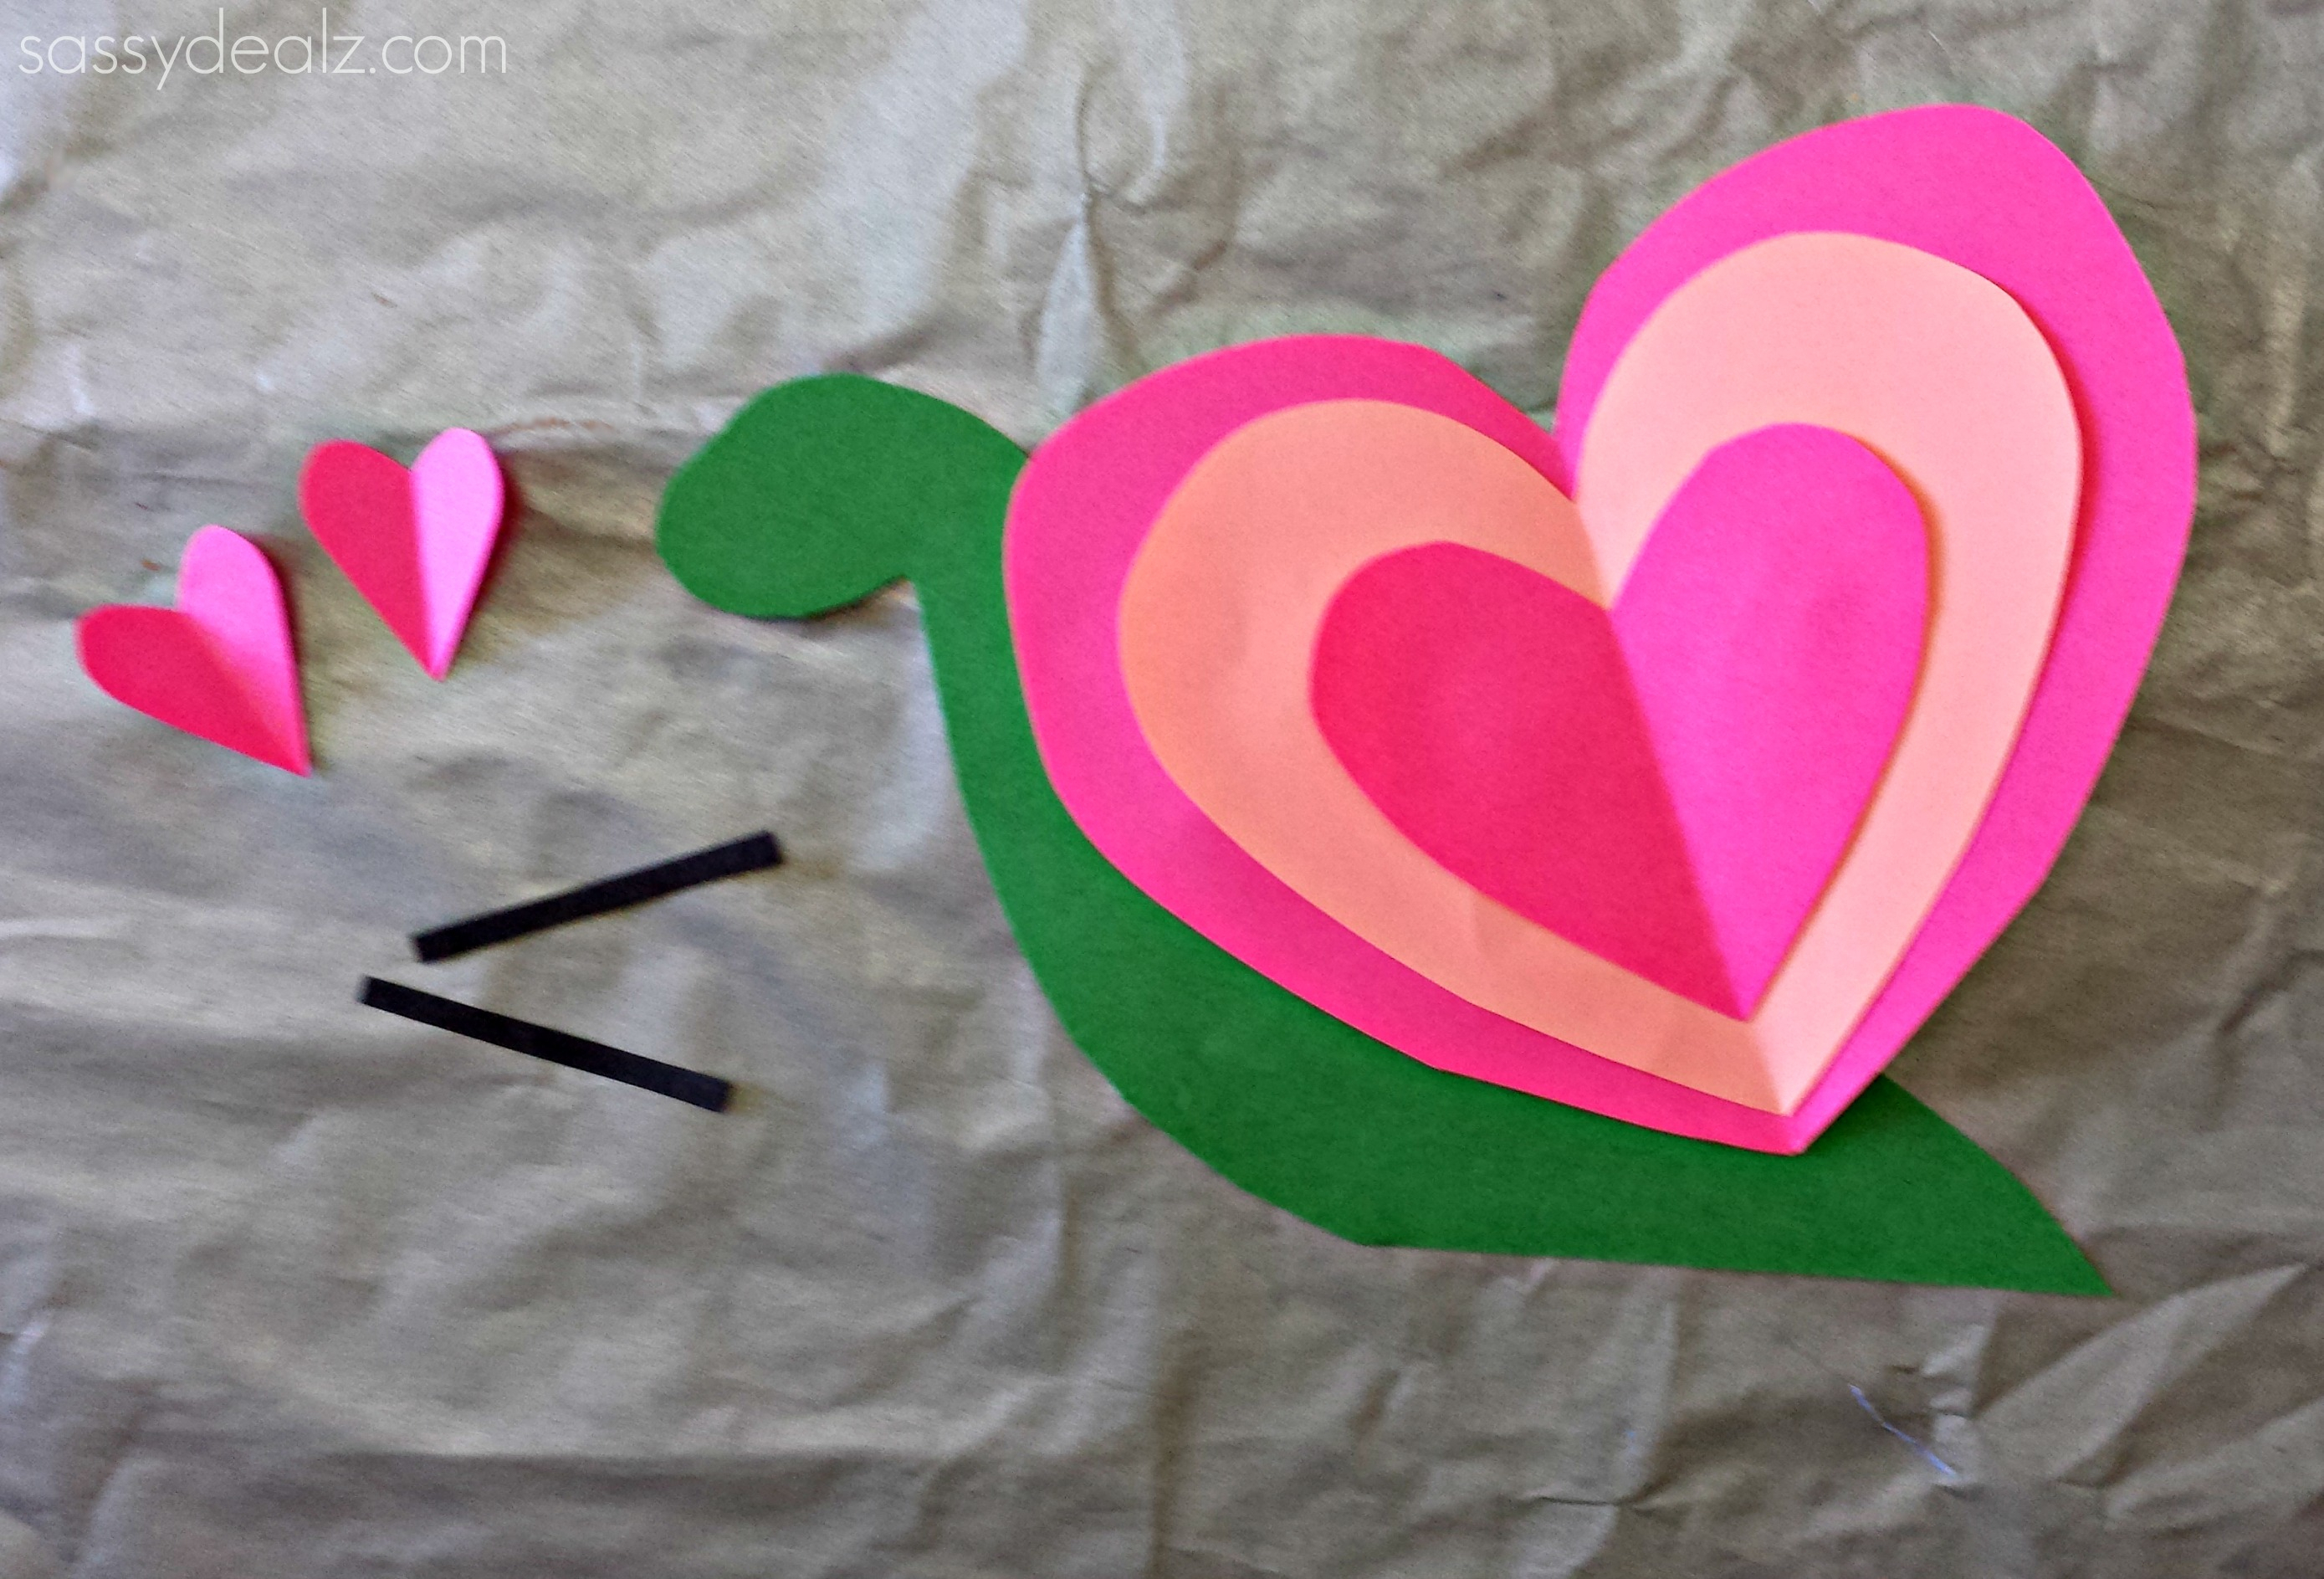 10 Stunning Arts And Crafts Ideas With Construction Paper heart snail craft for kids valentine art project crafty morning 3 2024